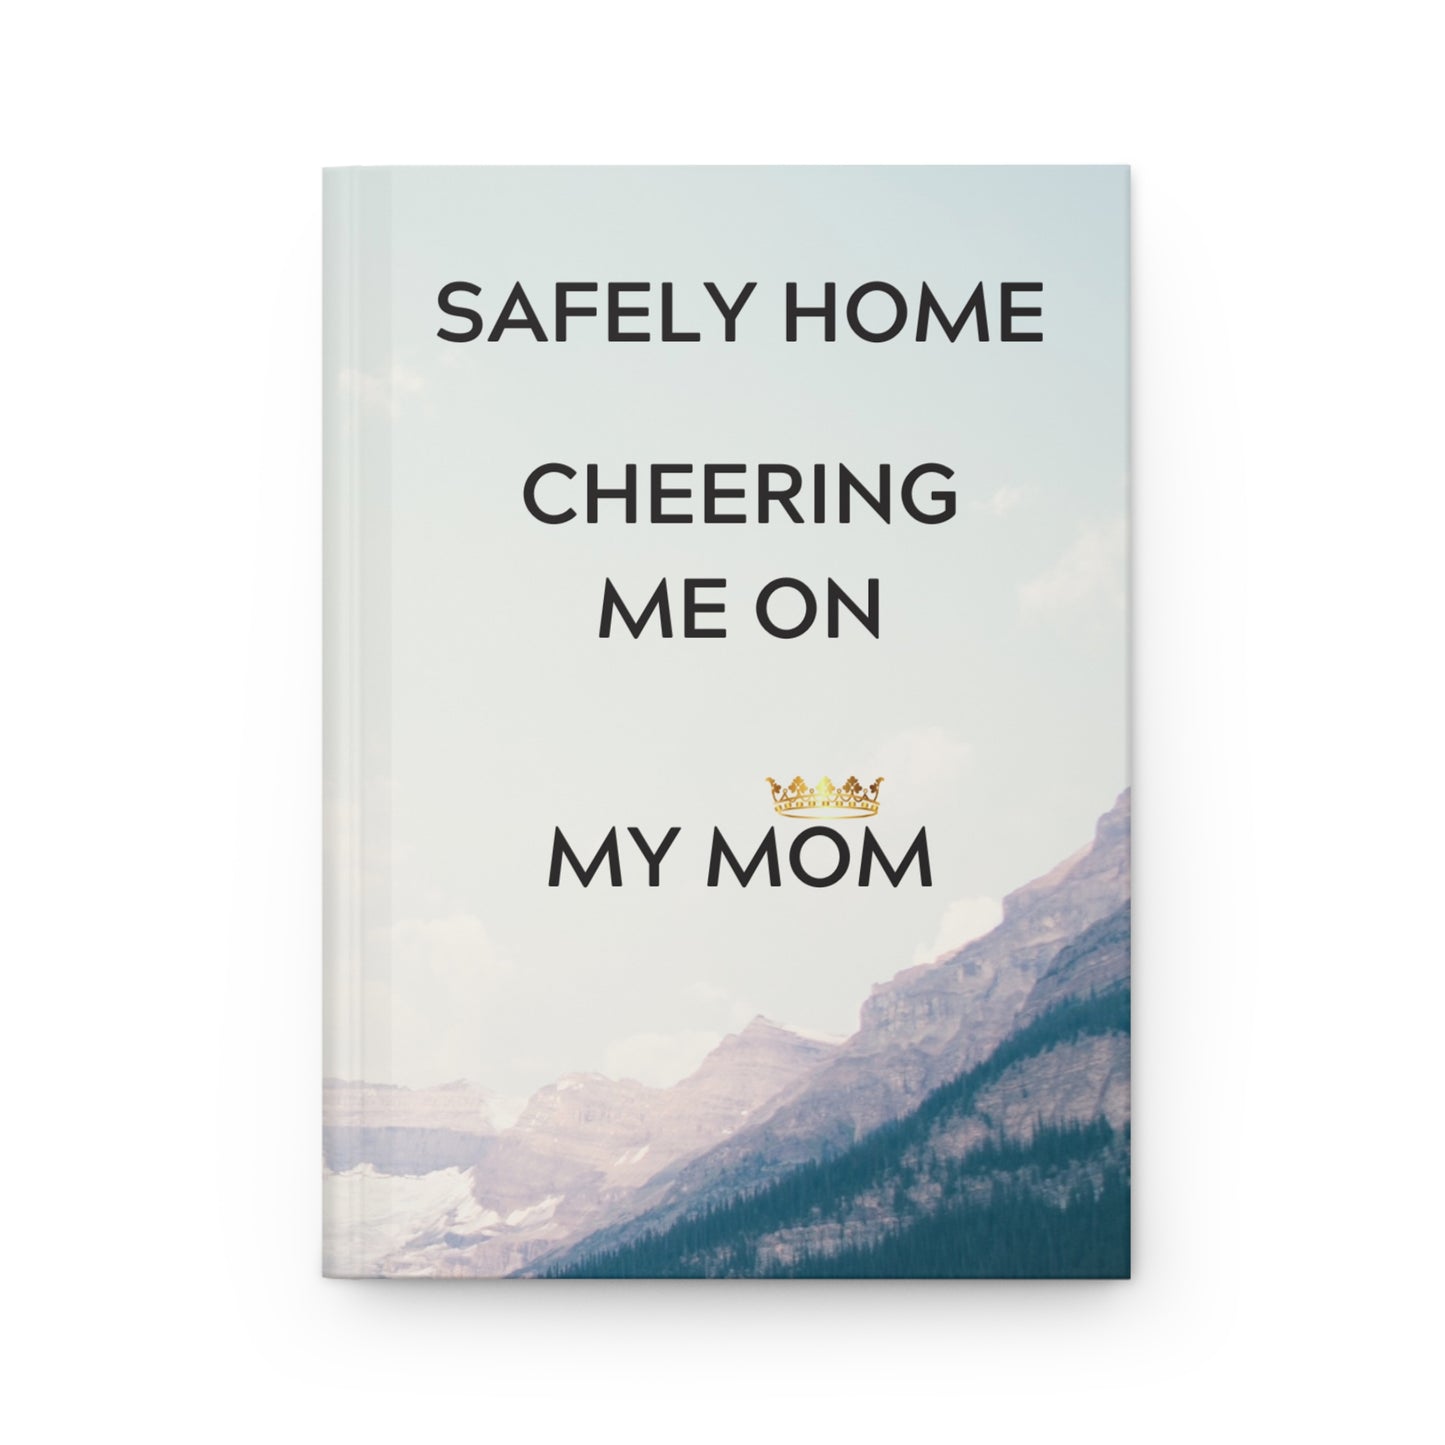 Grief Journal for Loss of Mother, Cheering Me On From Heaven